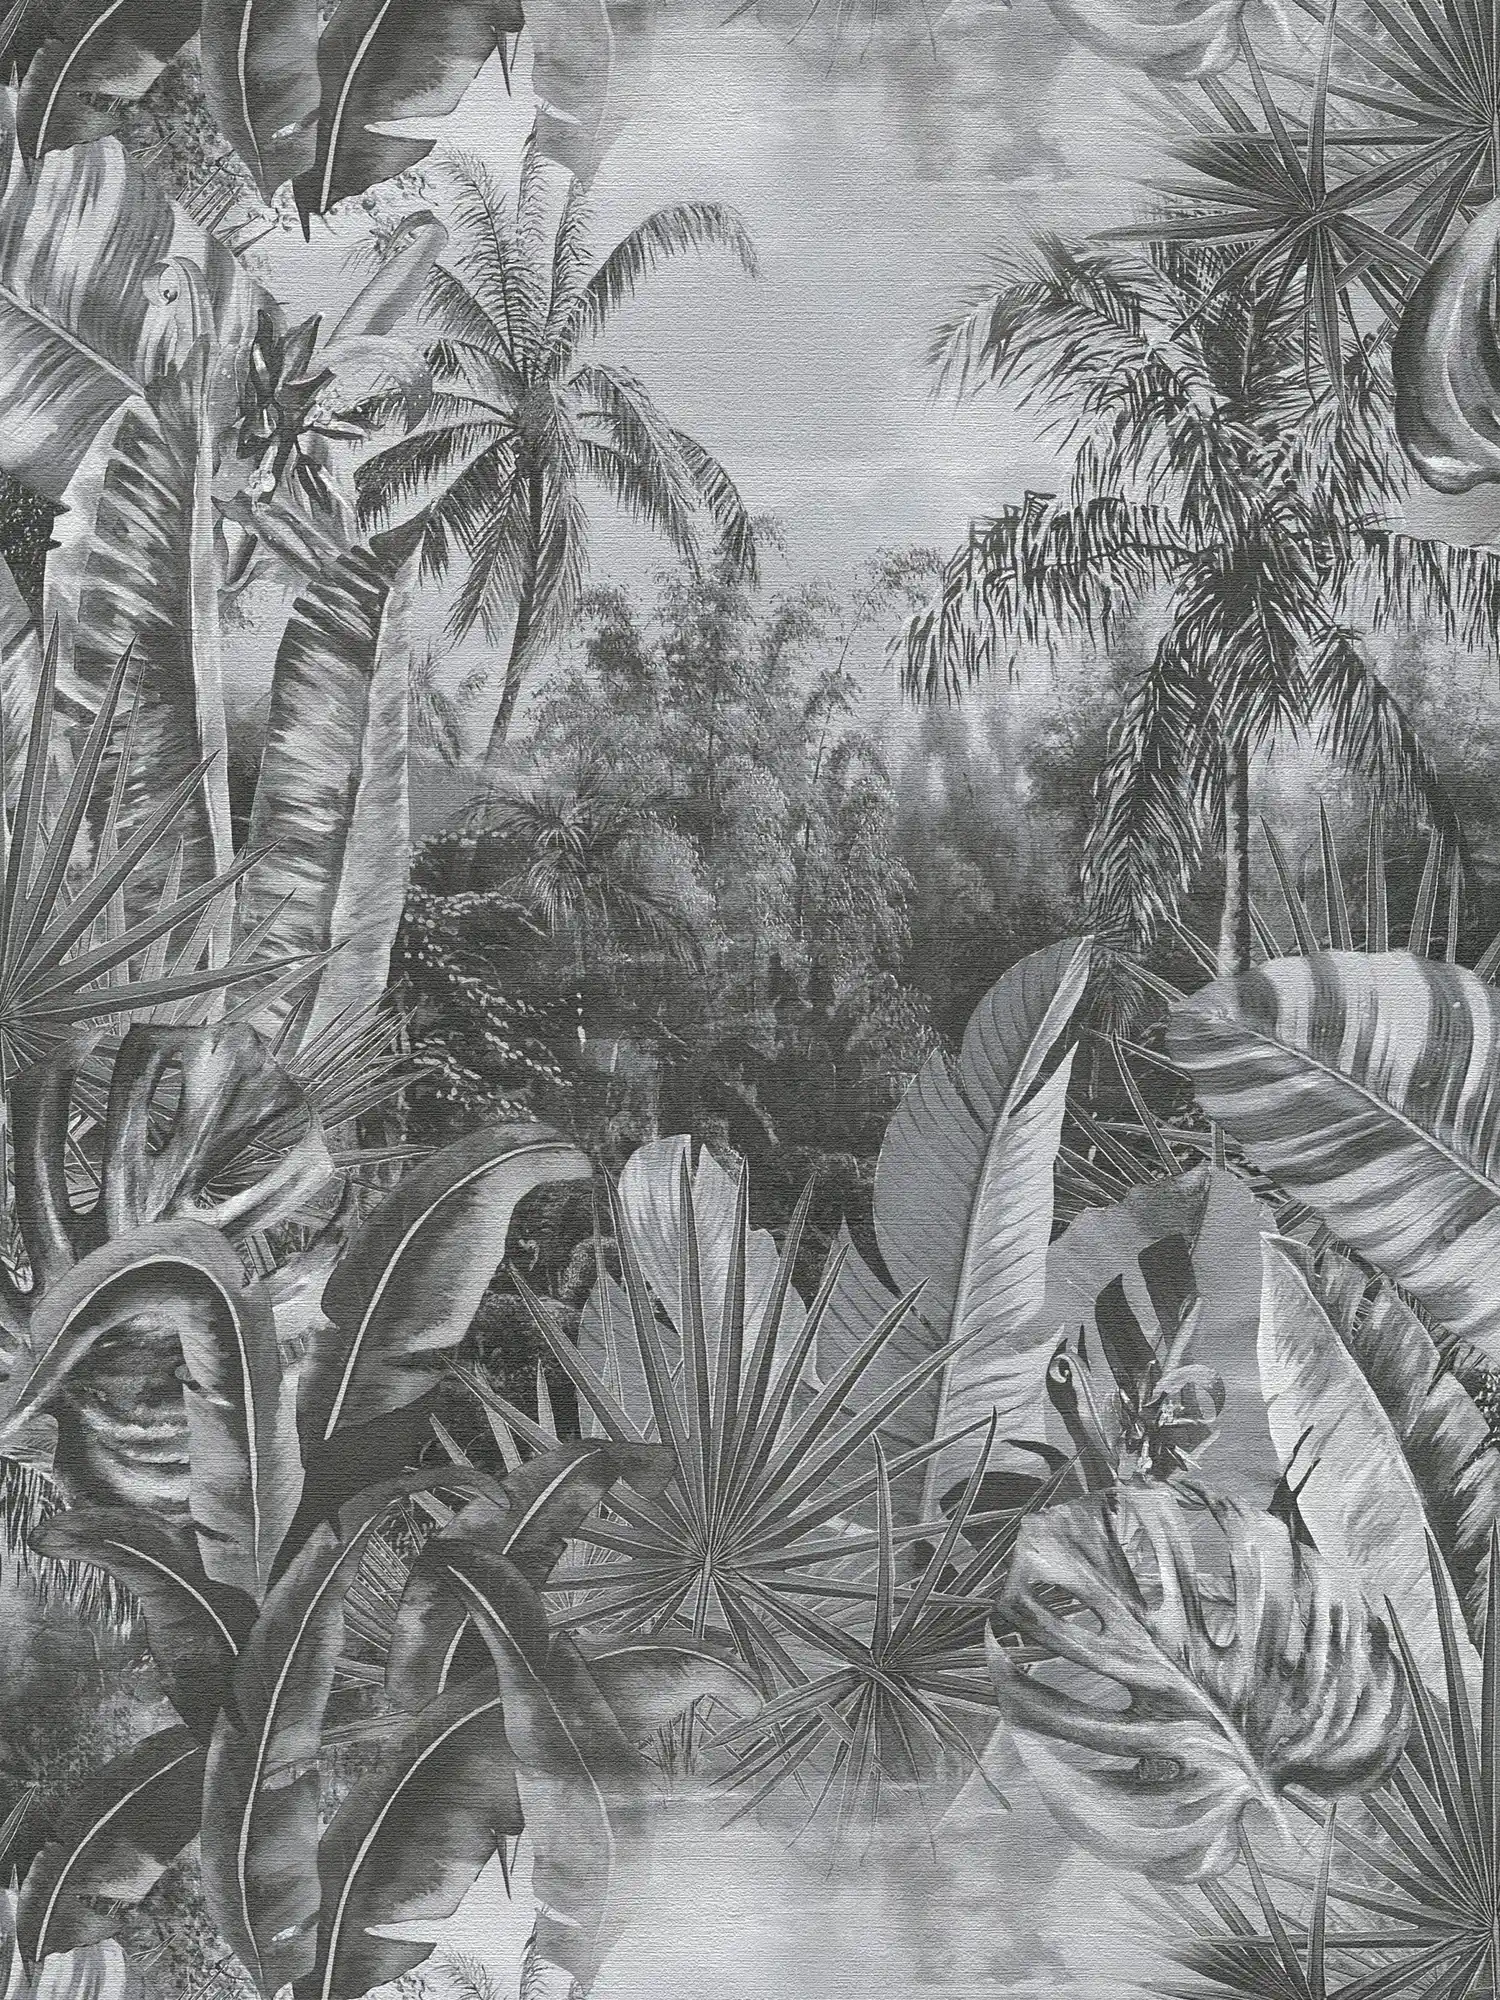 Black and white wallpaper jungle pattern with palm trees
